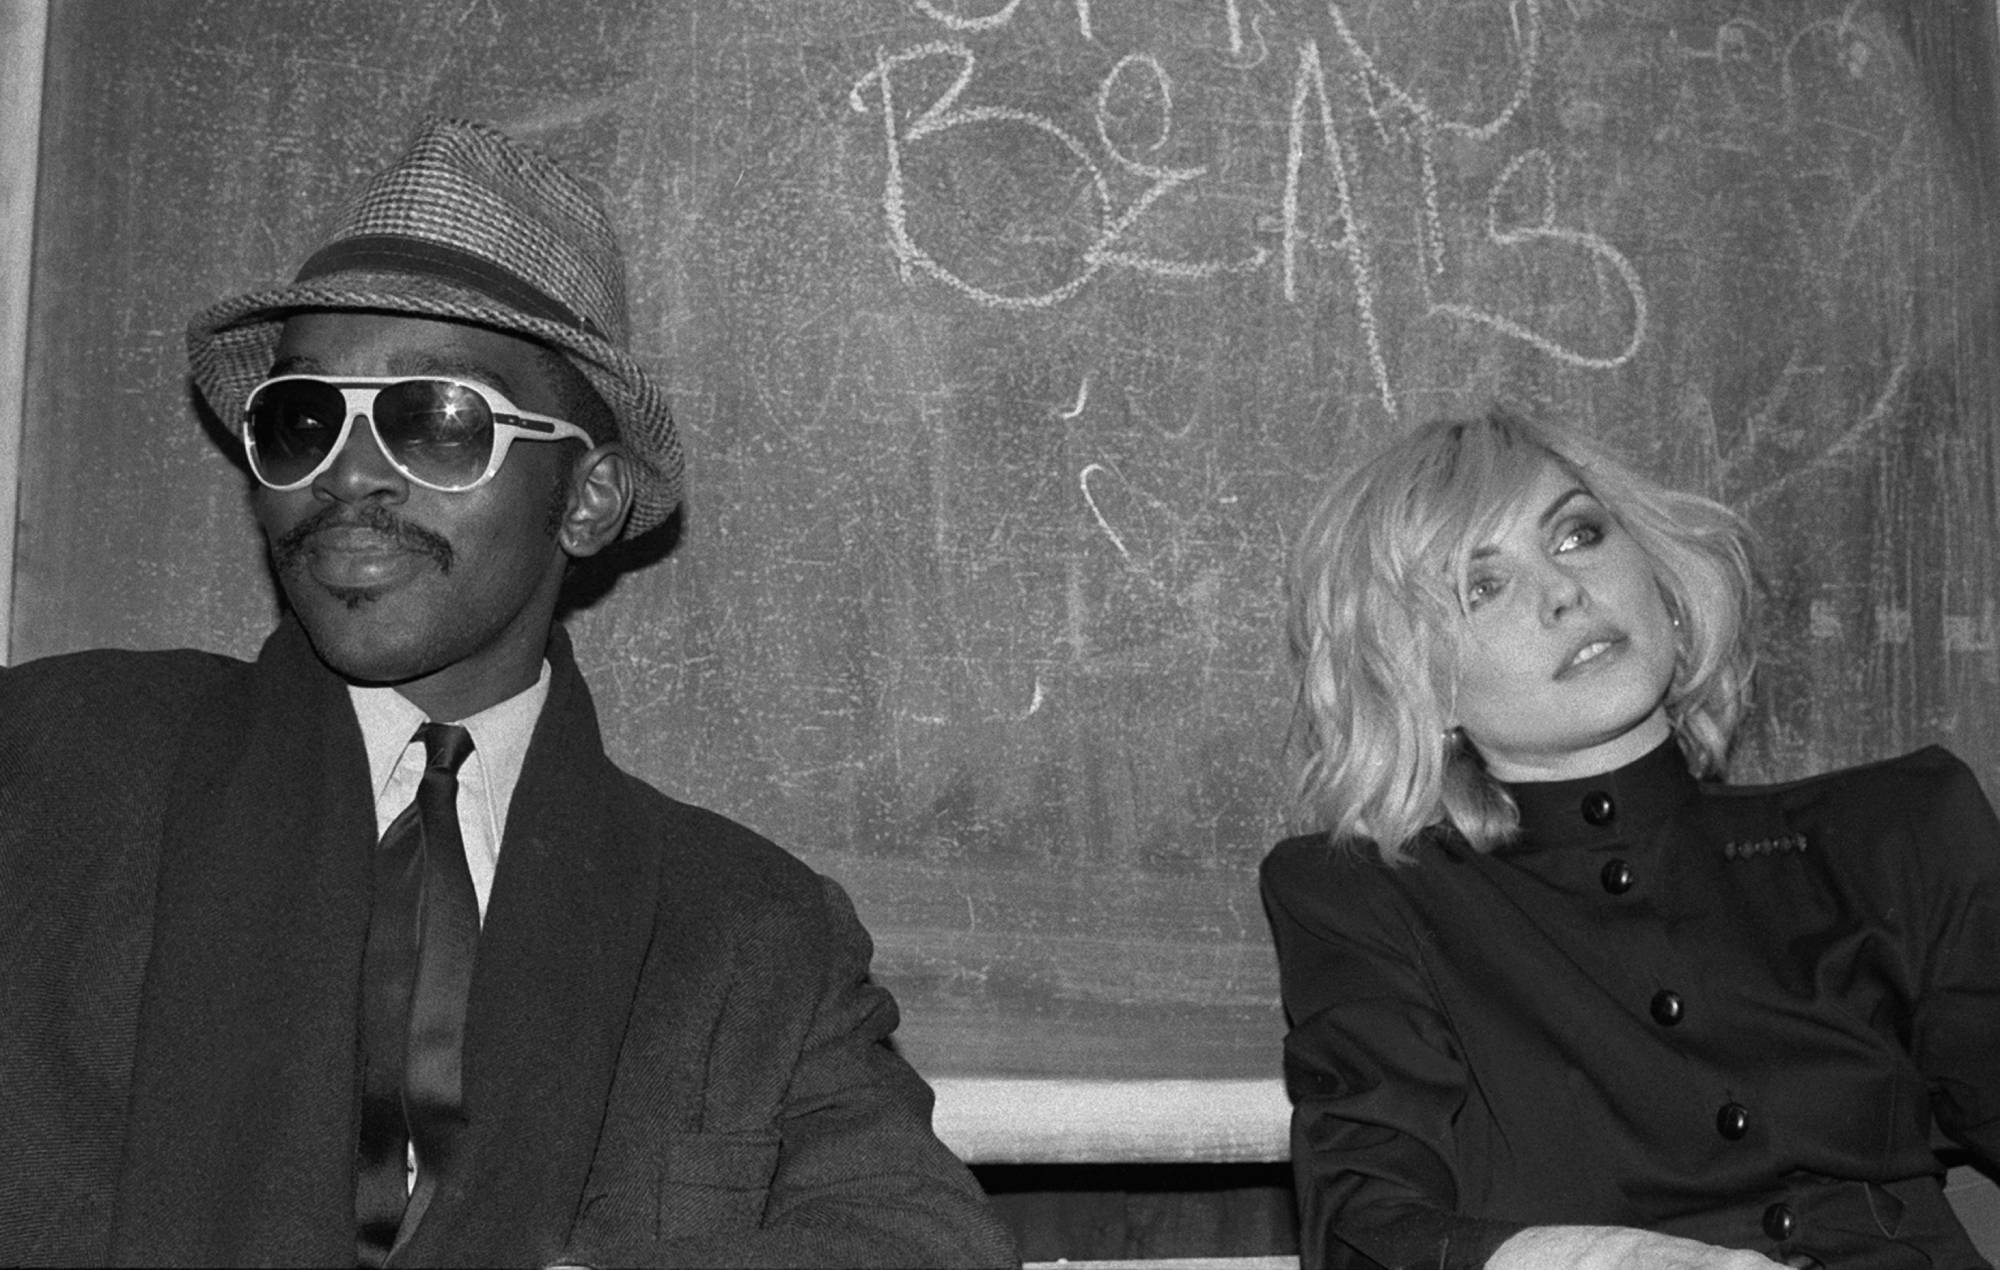 Blondie share rare Christmas track ‘Yuletide Throwdown’ and talk Fab 5 Freddy, new music and touring